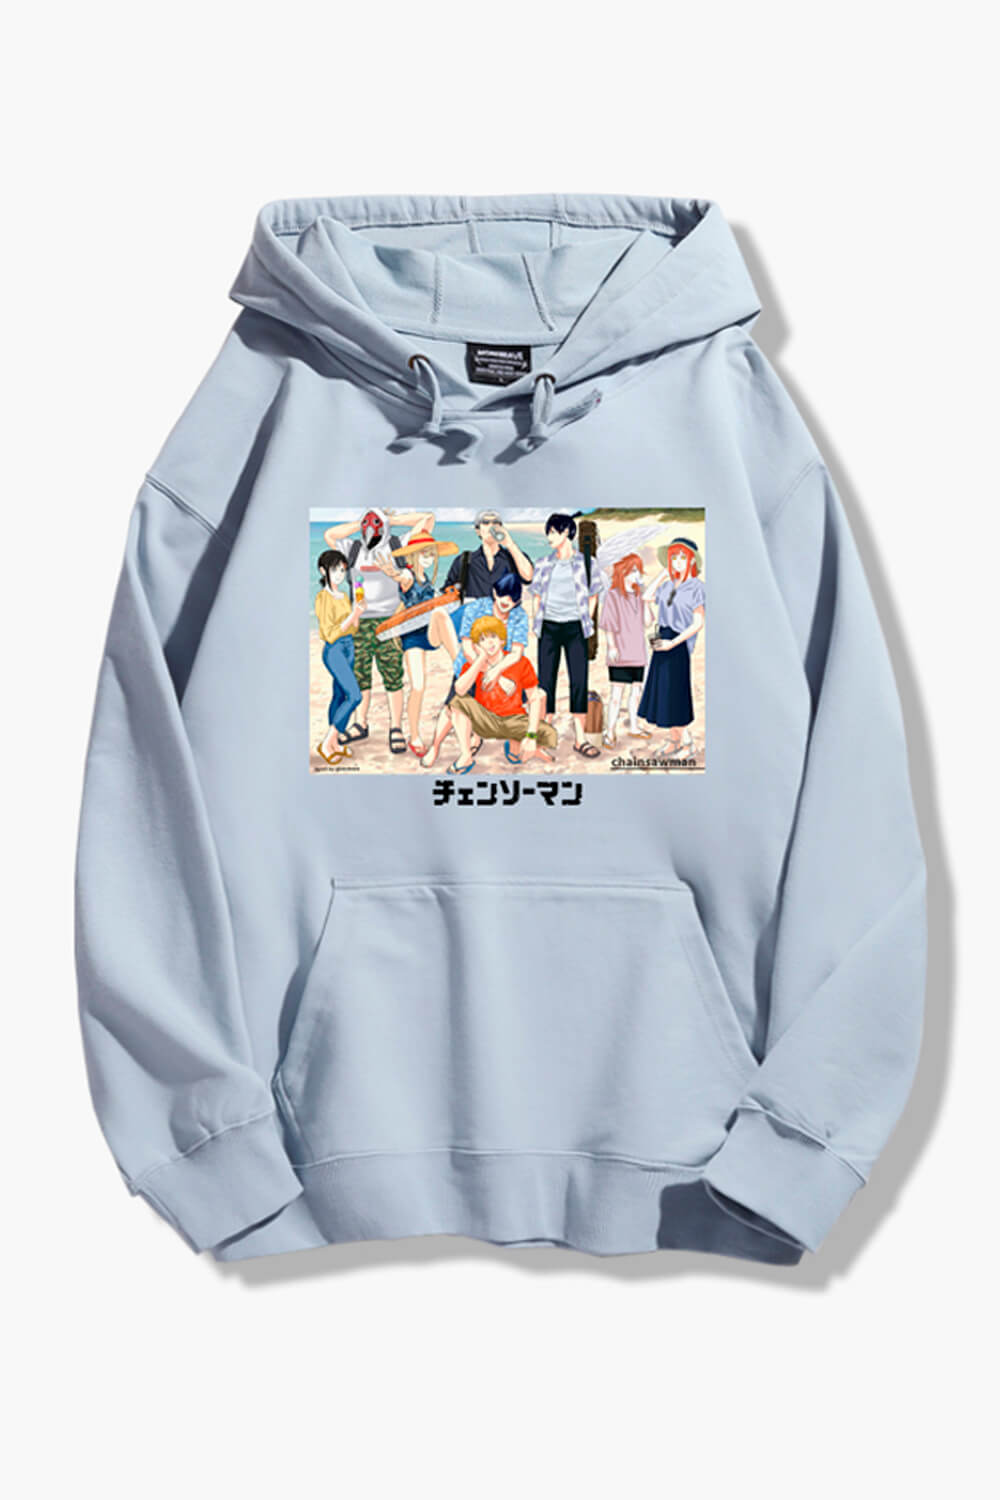 Chainsaw Man Beach Party Anime Hoodie Pastel Blue